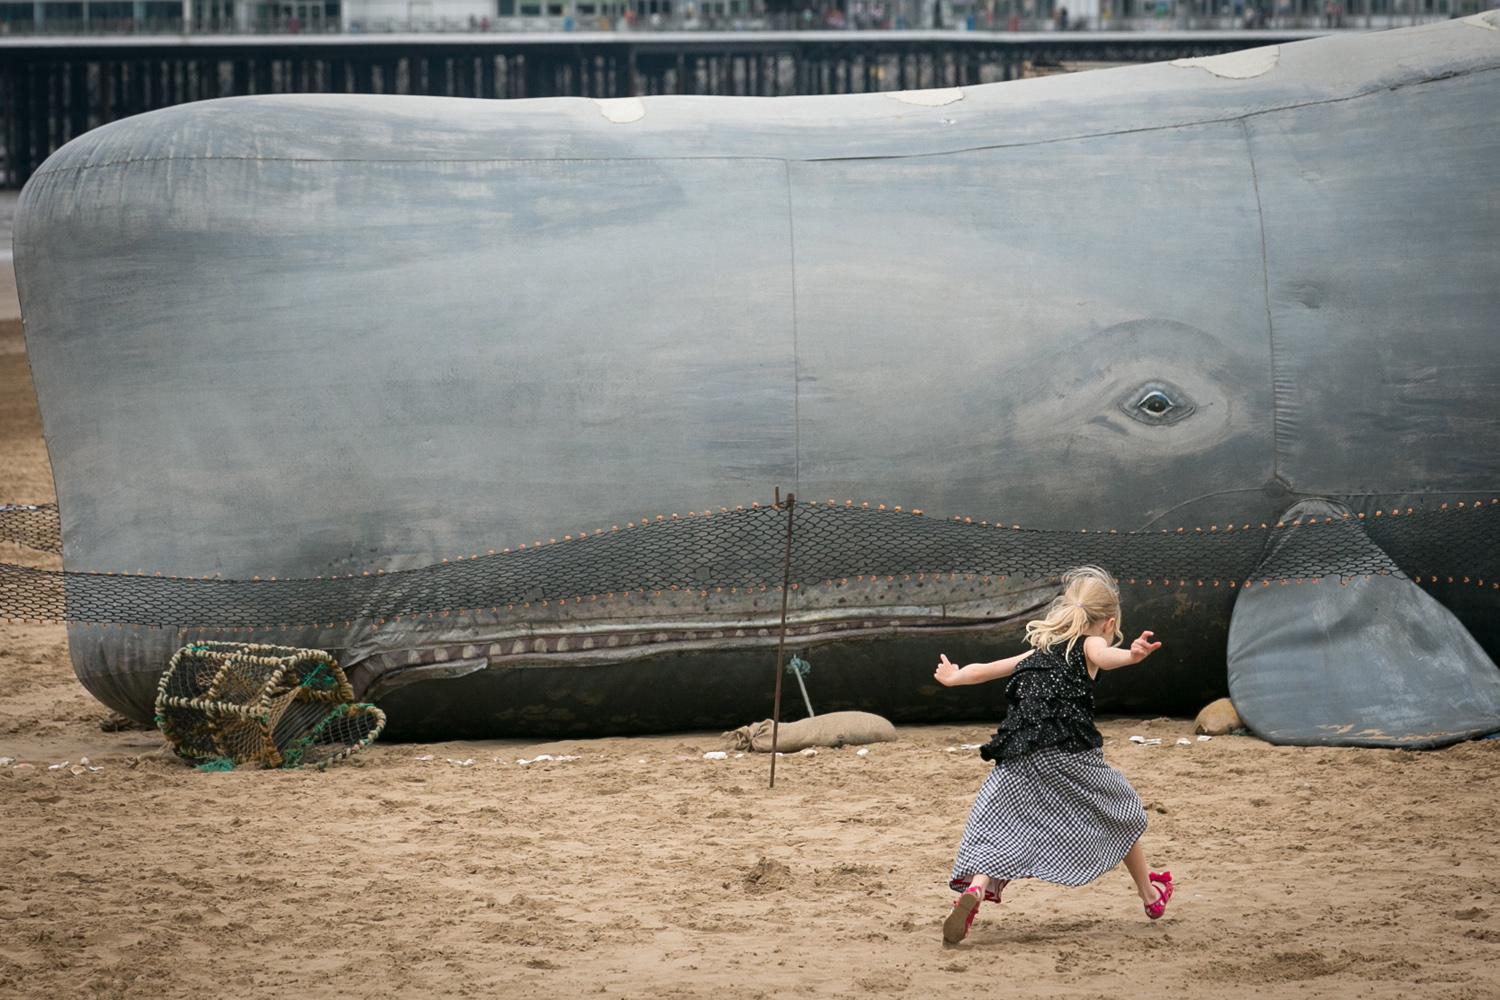 Biblical Whale Inflated On Weston-Super-Mare Beach